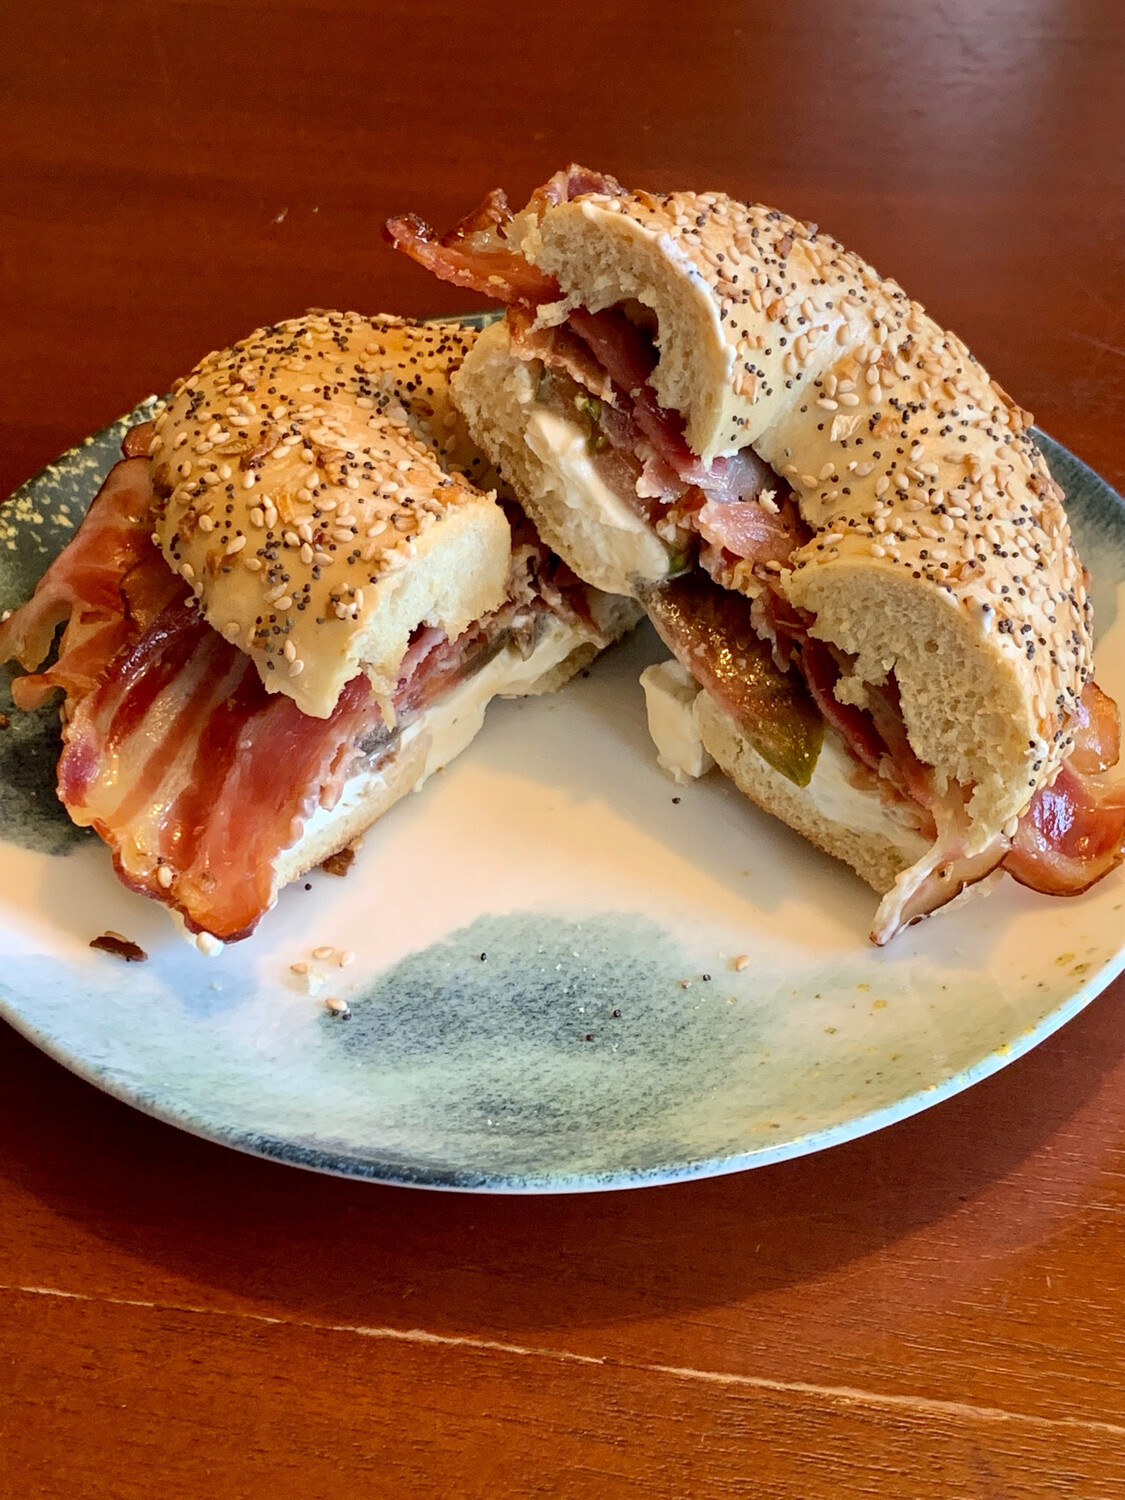 New York Bagel or "Hard" Roll, Bacon, Tomato, and Cream Cheese Sandwich